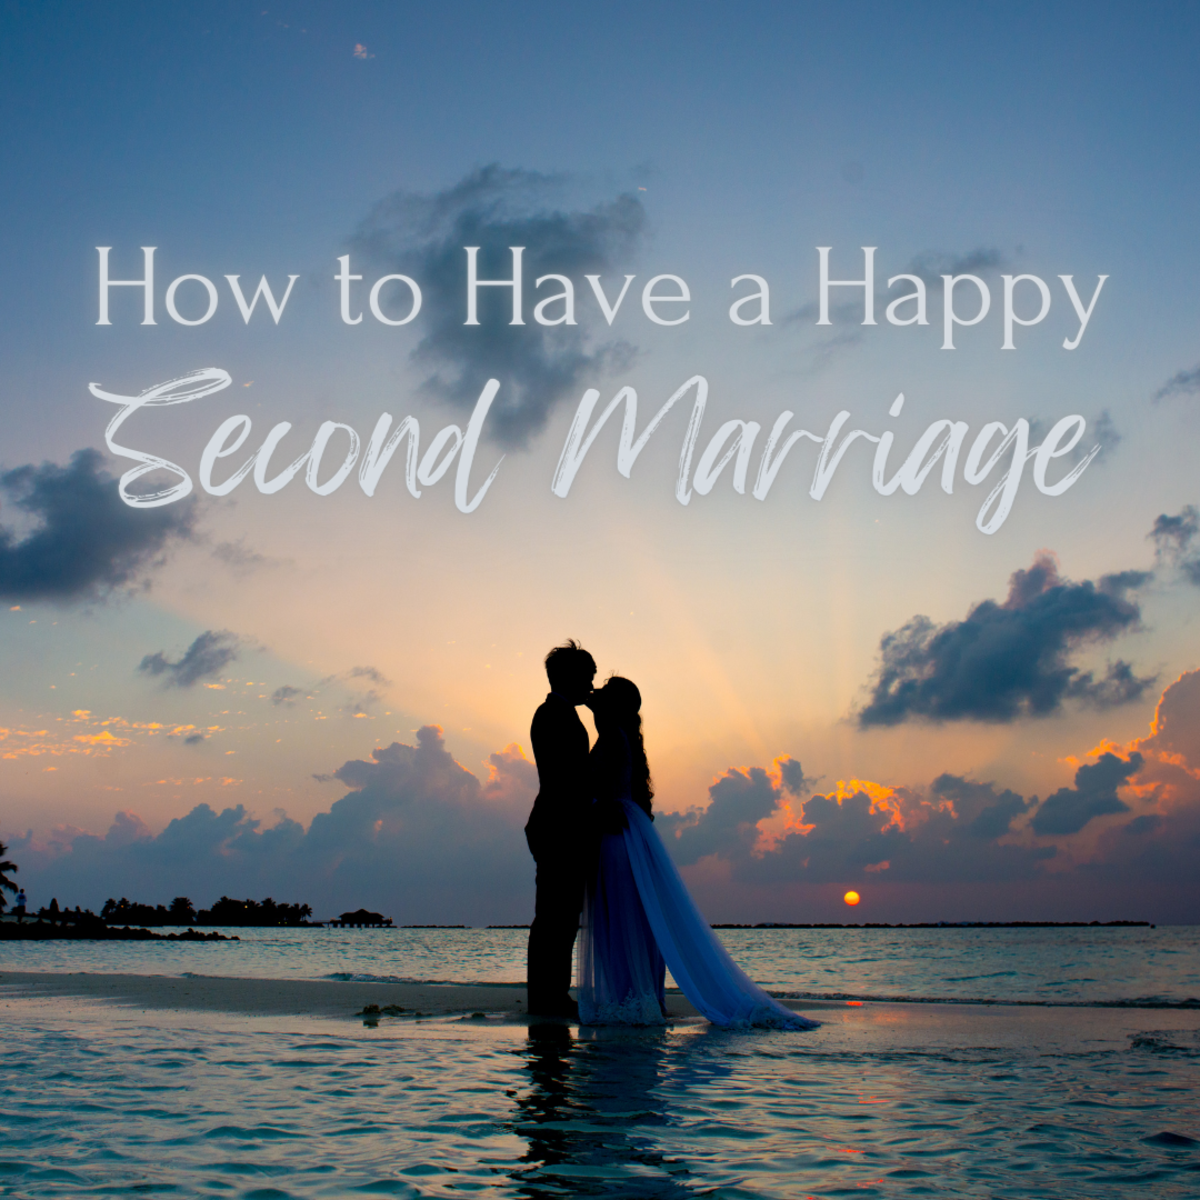 10 Tips for a Happy Second Marriage